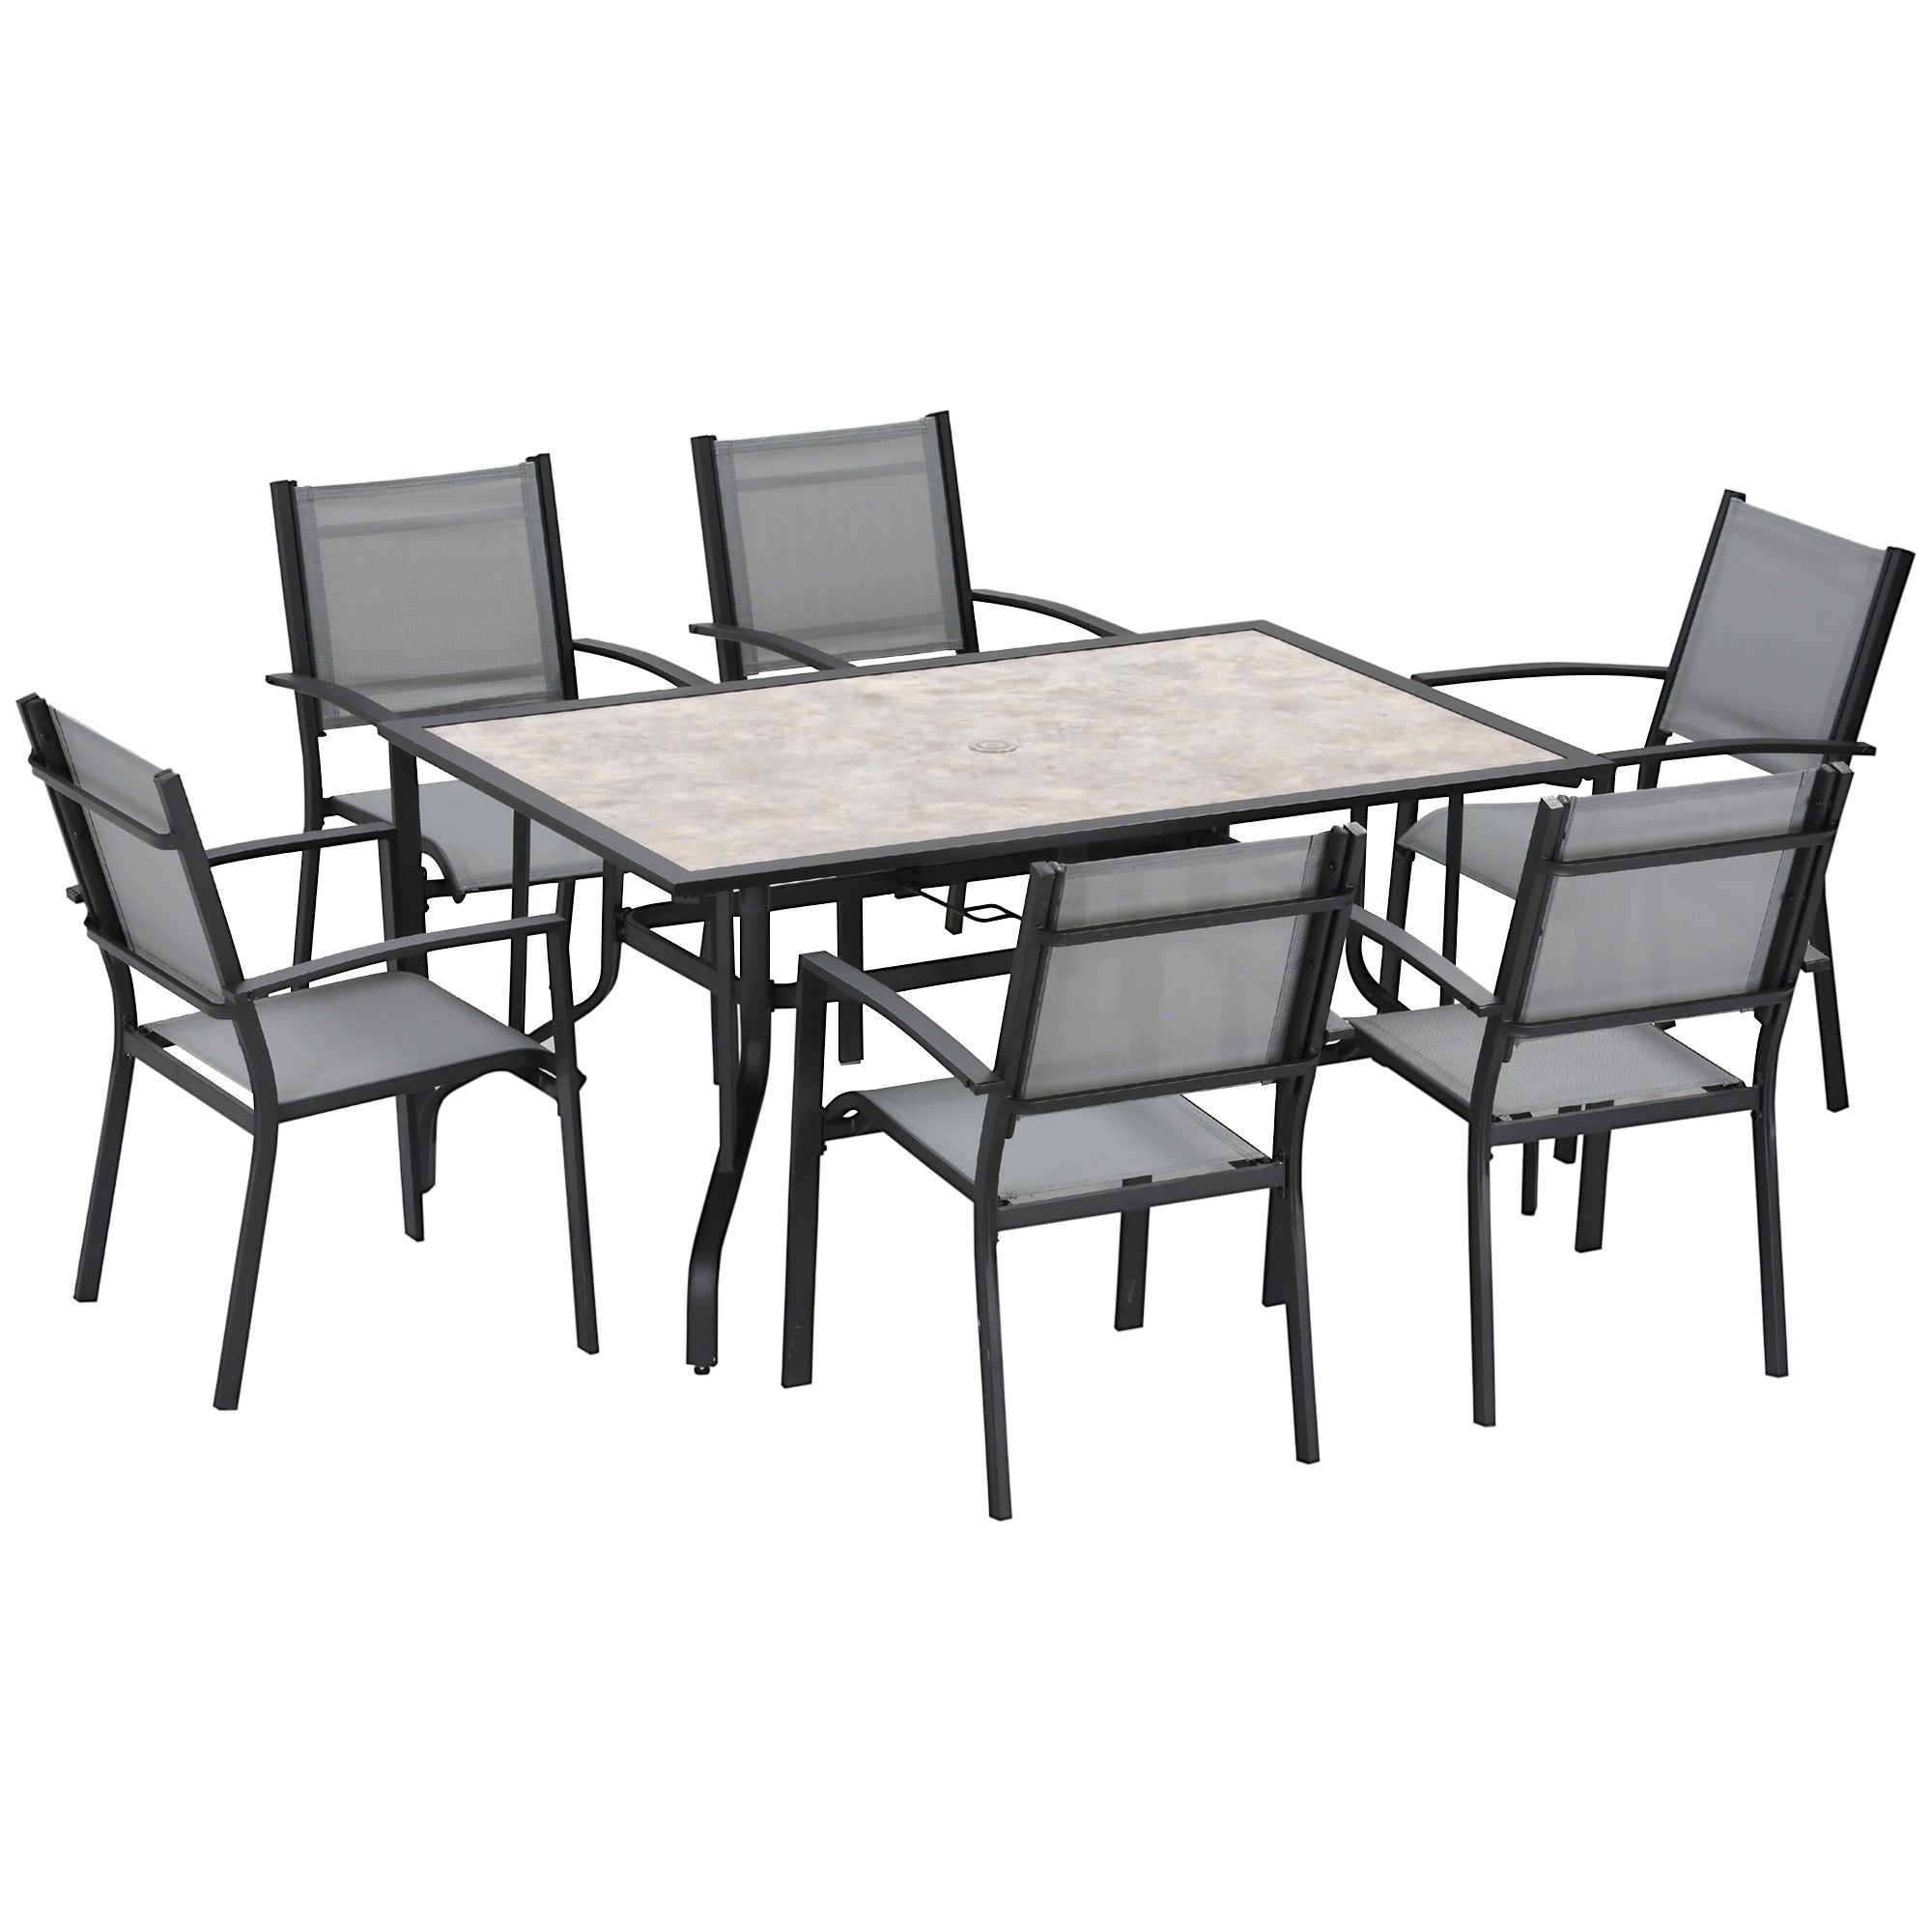 Outsunny 7 Piece Garden Furniture Set w/ Dining Table Chairs 6 Seater Grey  | TJ Hughes